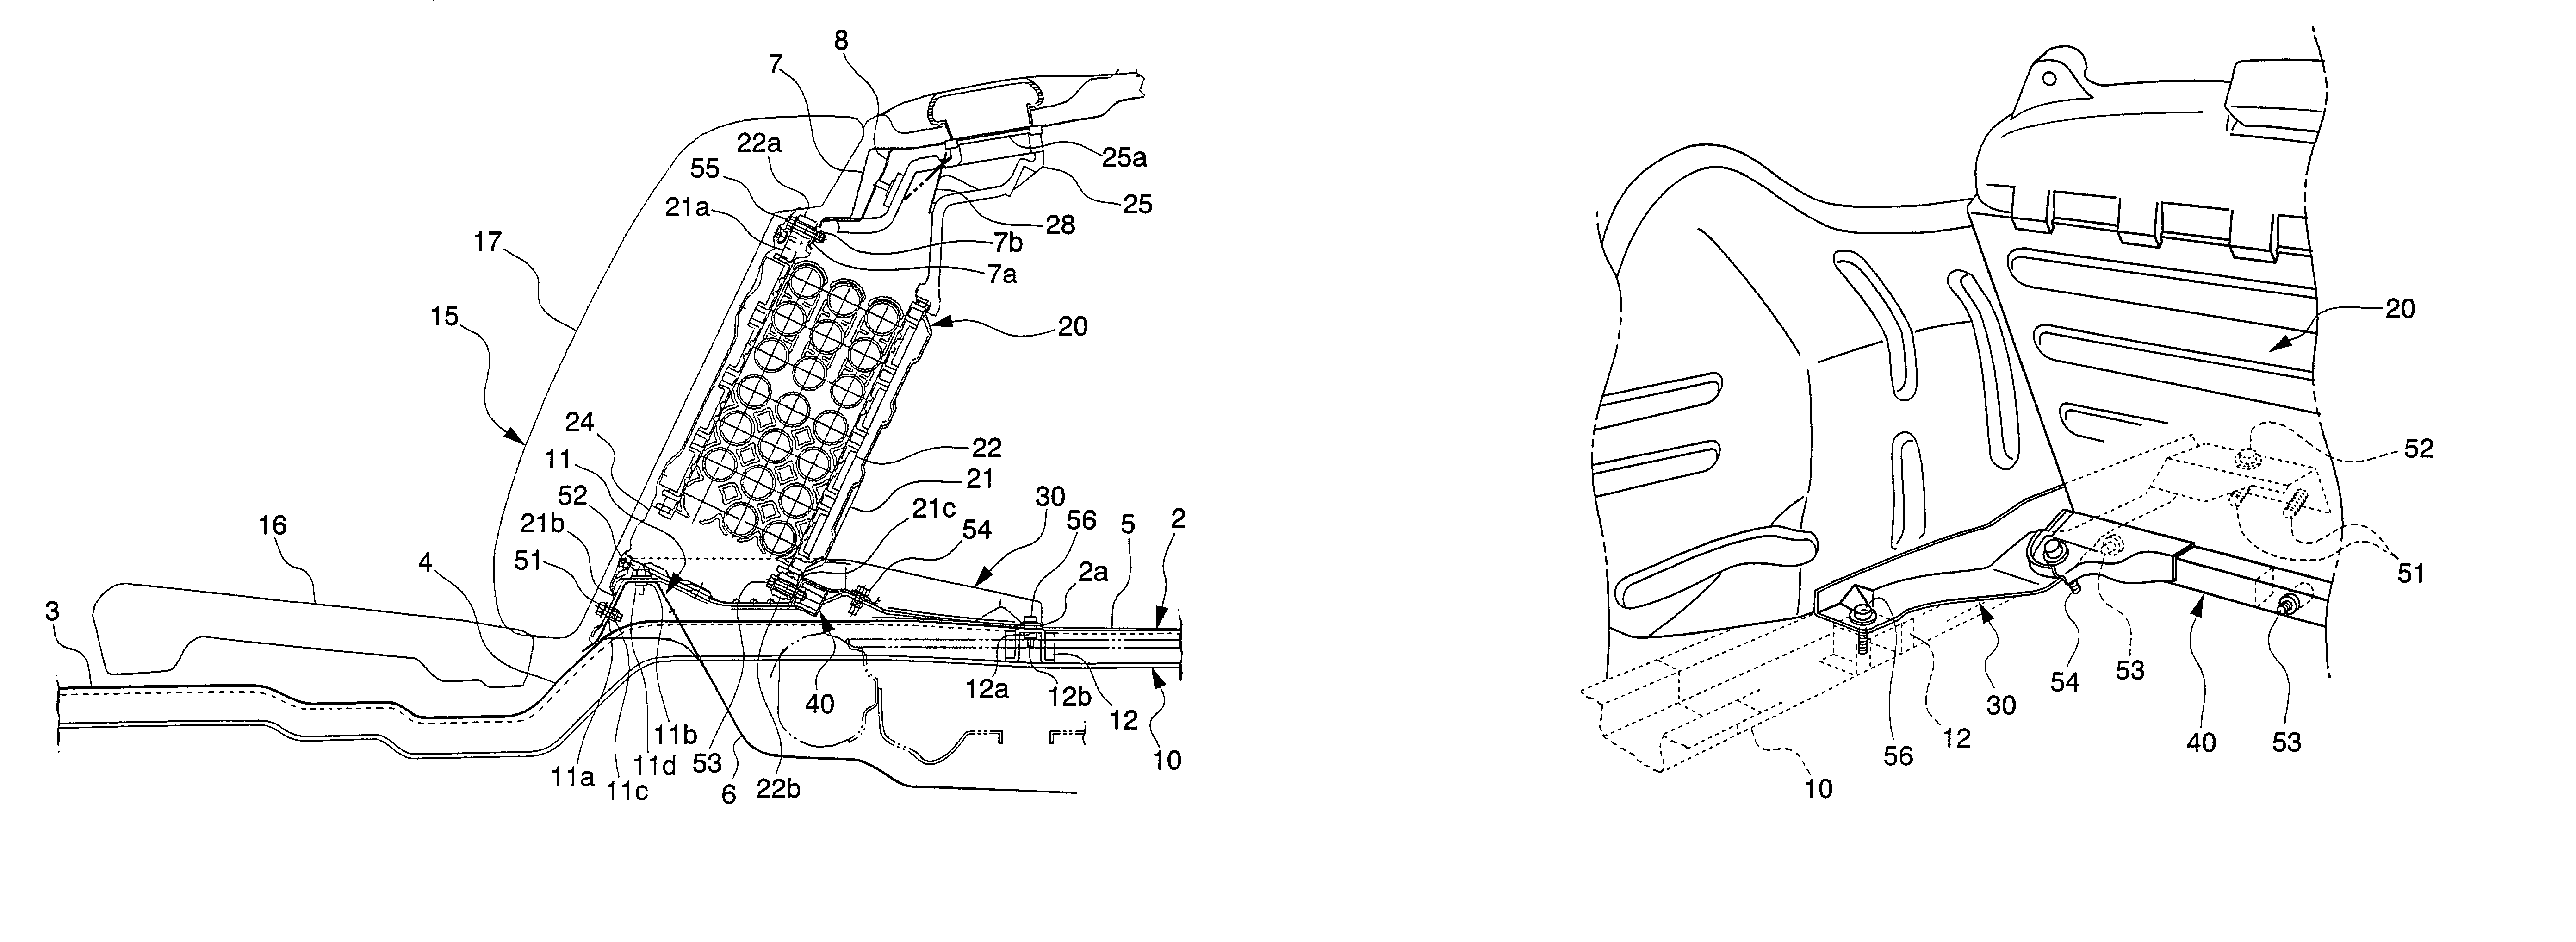 Structure for mounting box for containing high-voltage electrical equipment on vehicle